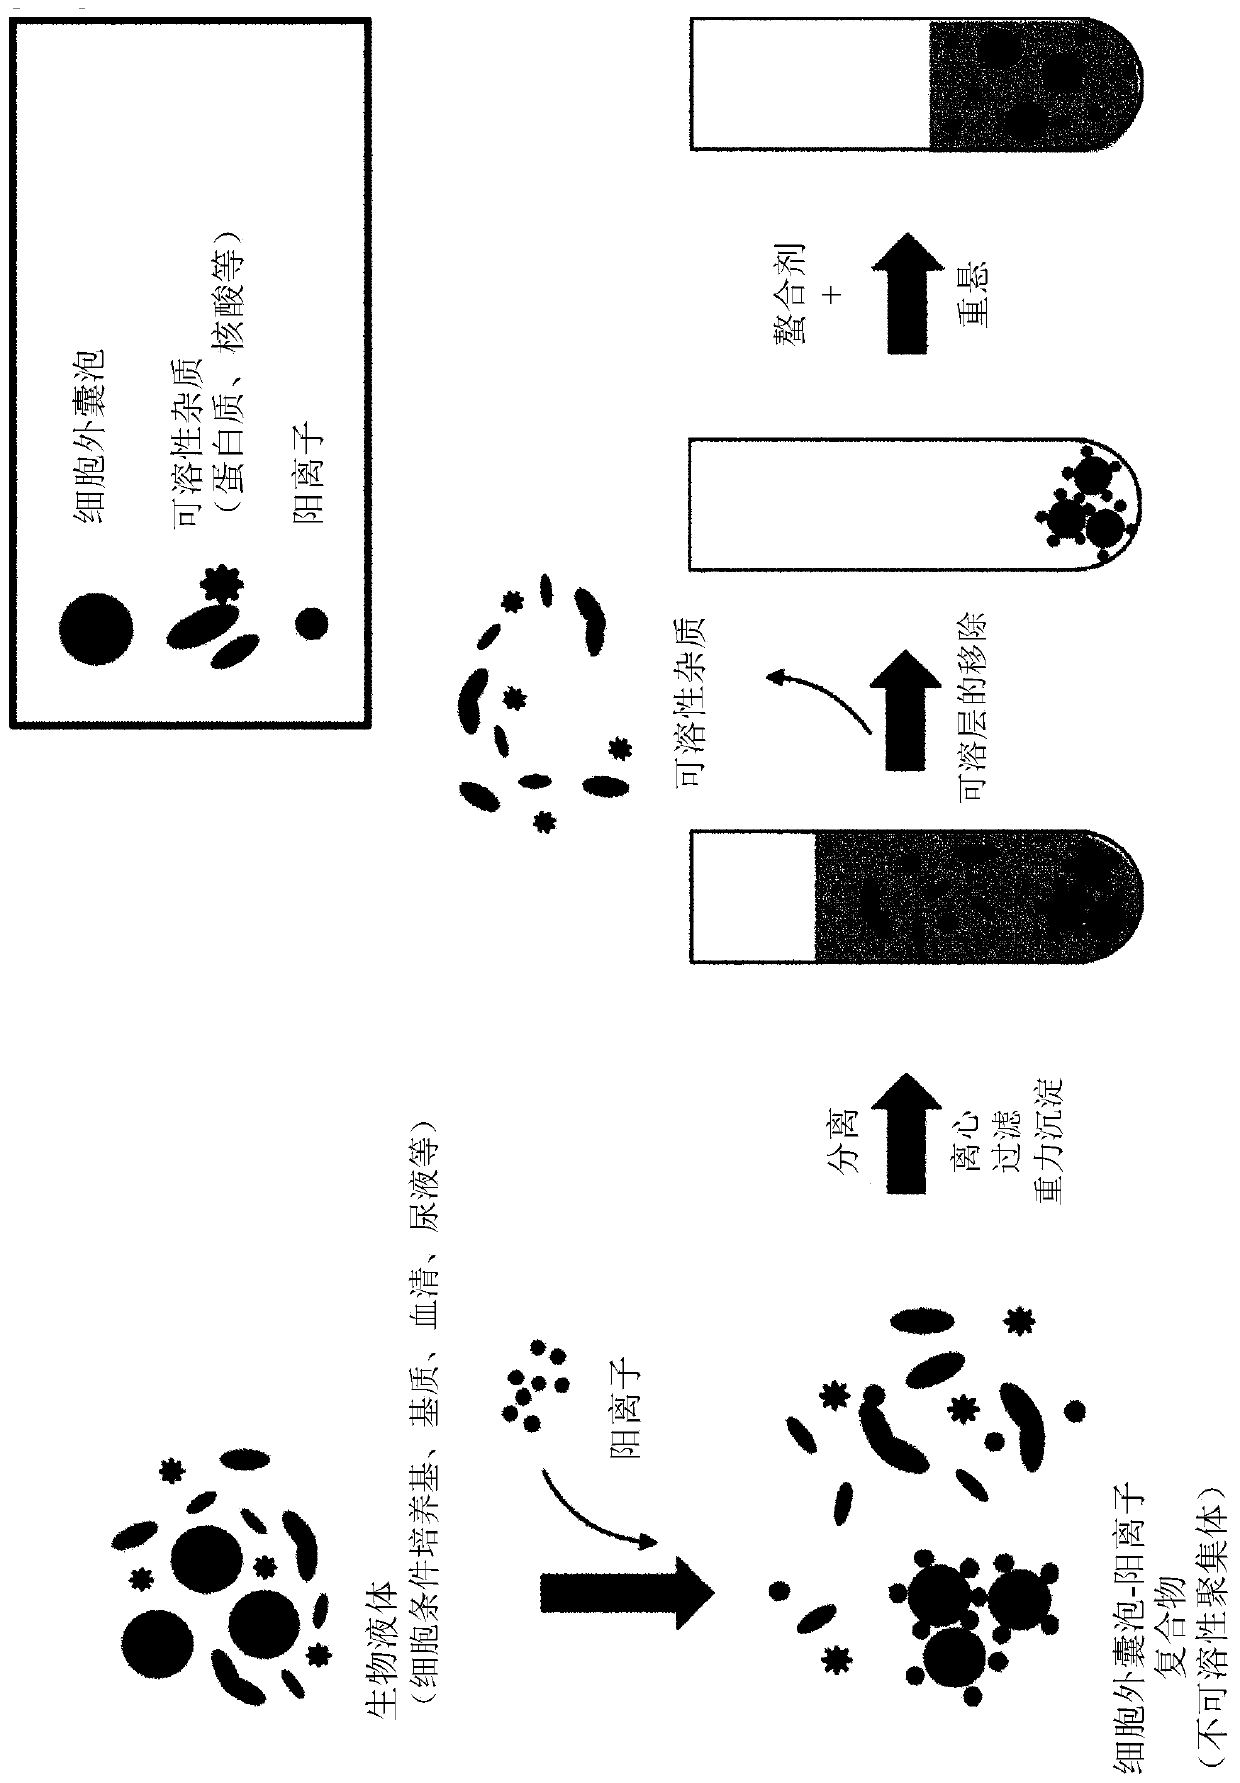 Method for isolating extracellular vesicles using cations